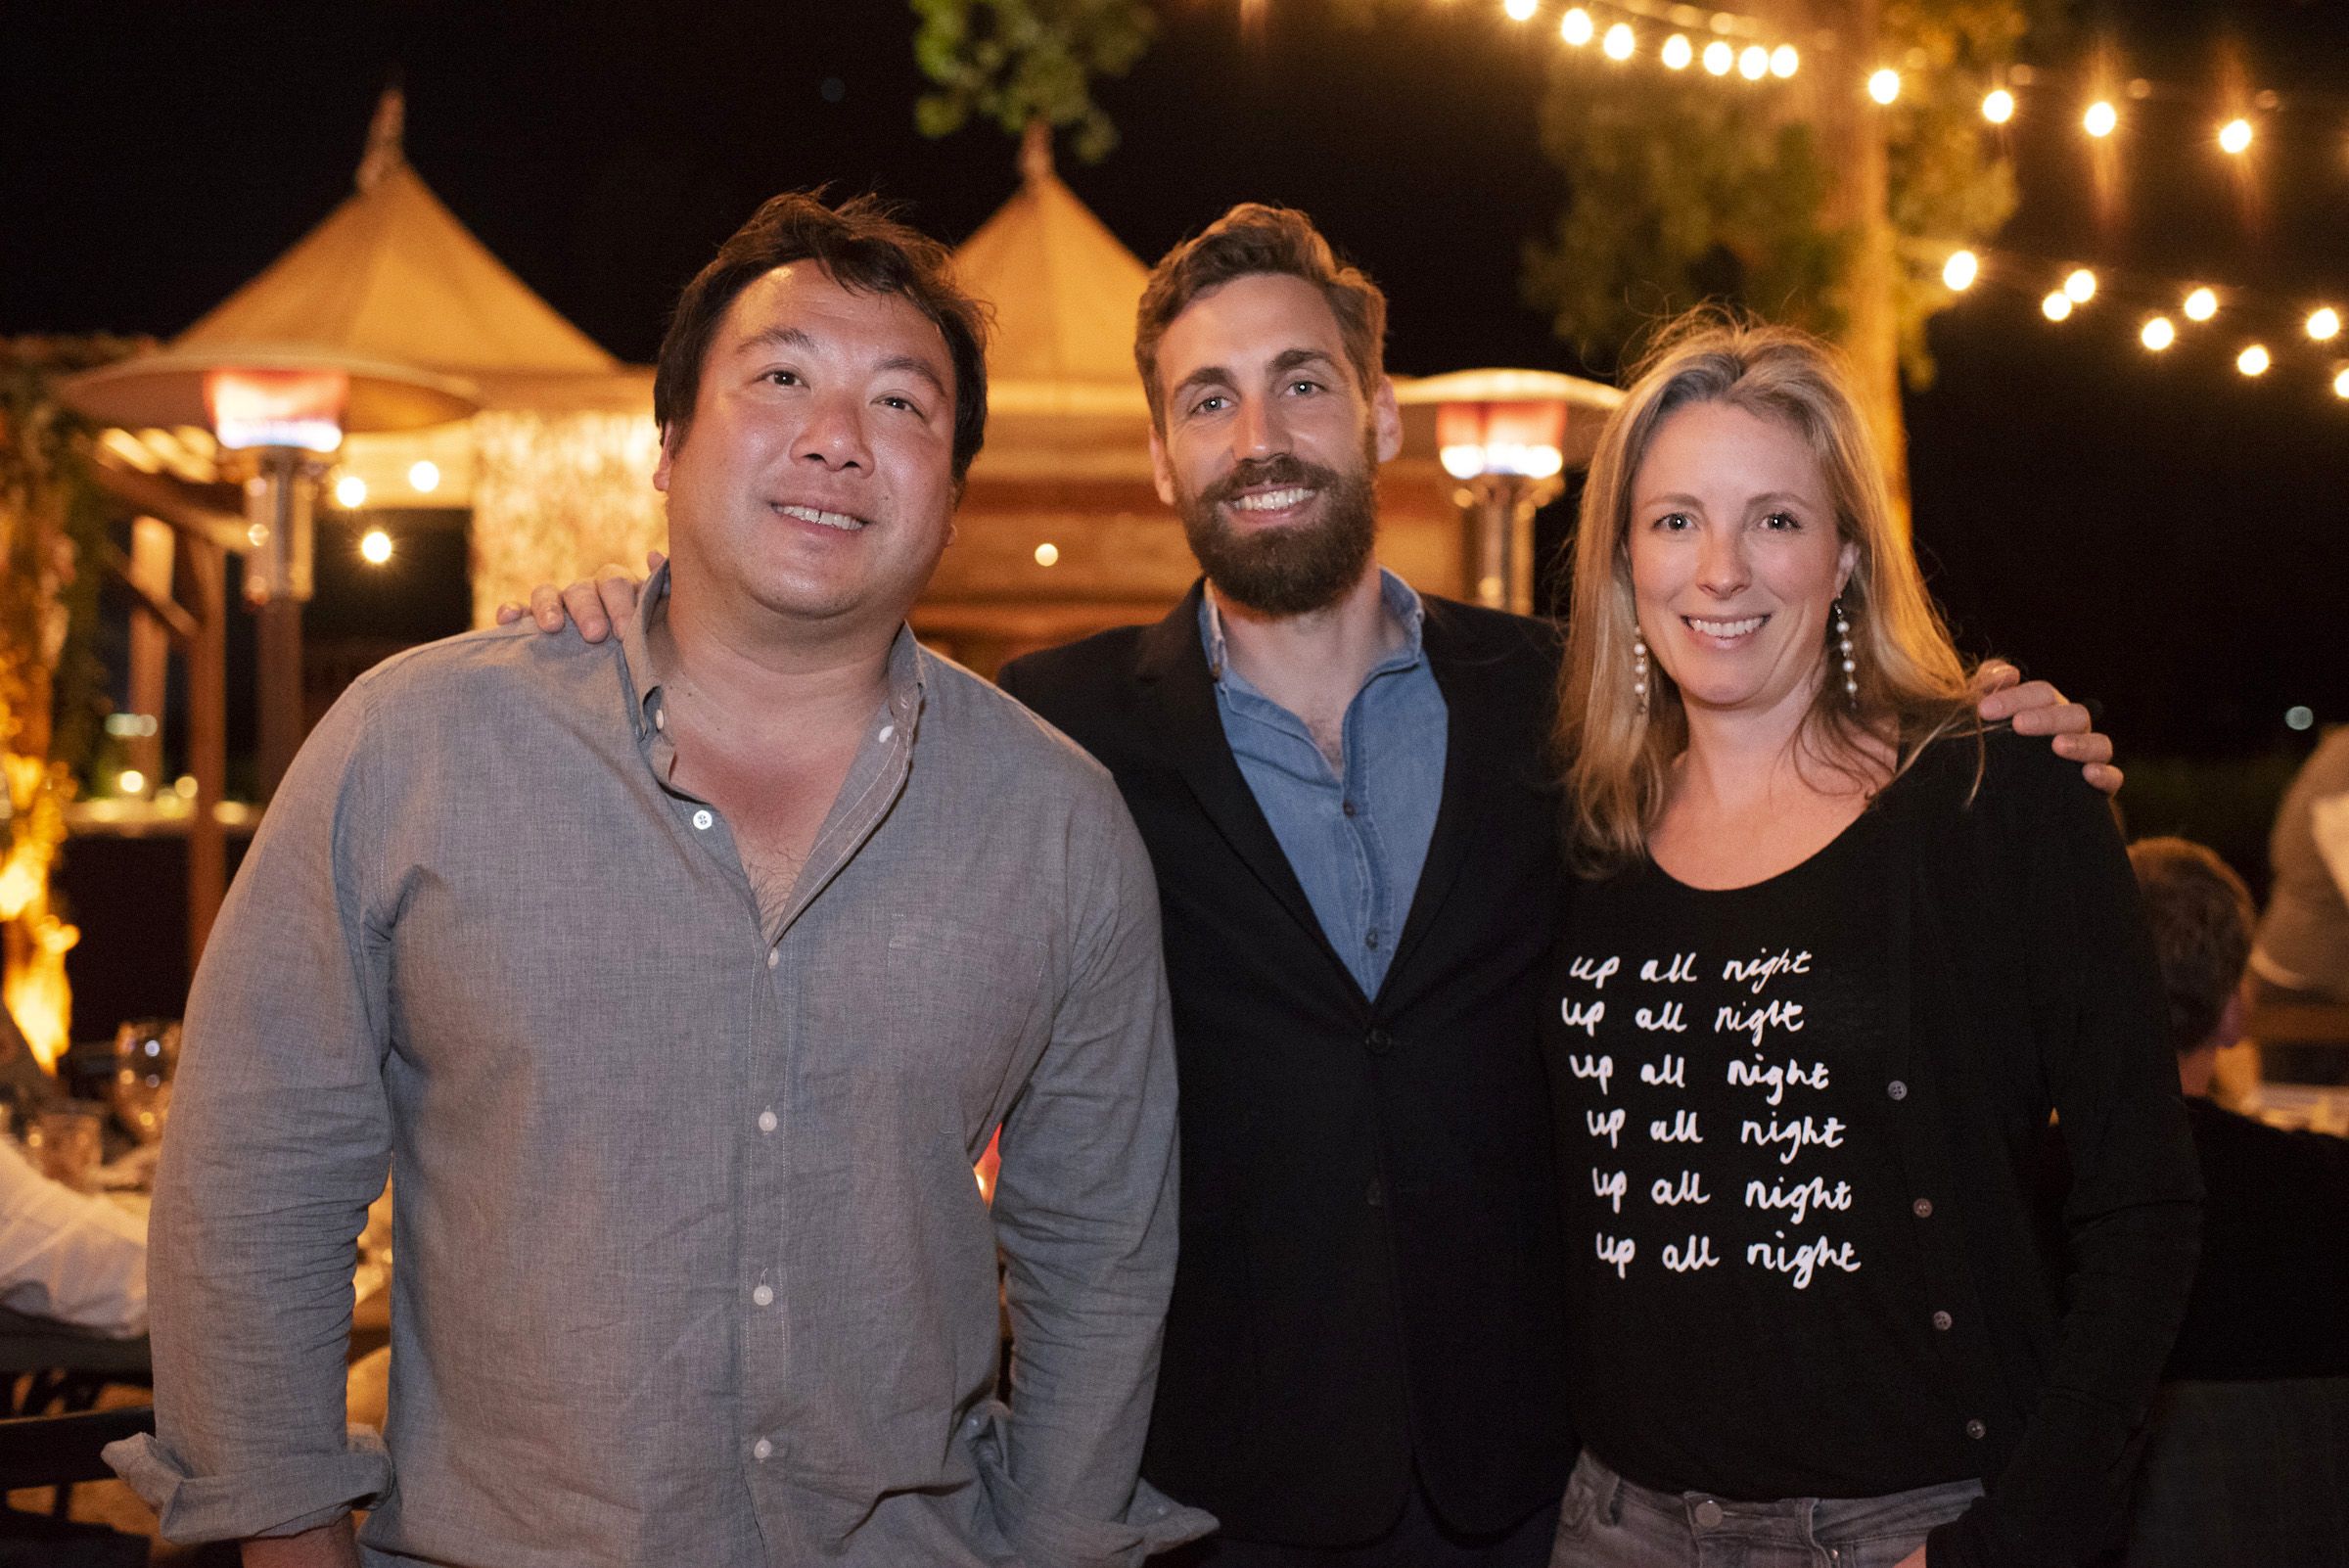 With William Shu of Deliveroo and Stephanie Phair of Farfetch